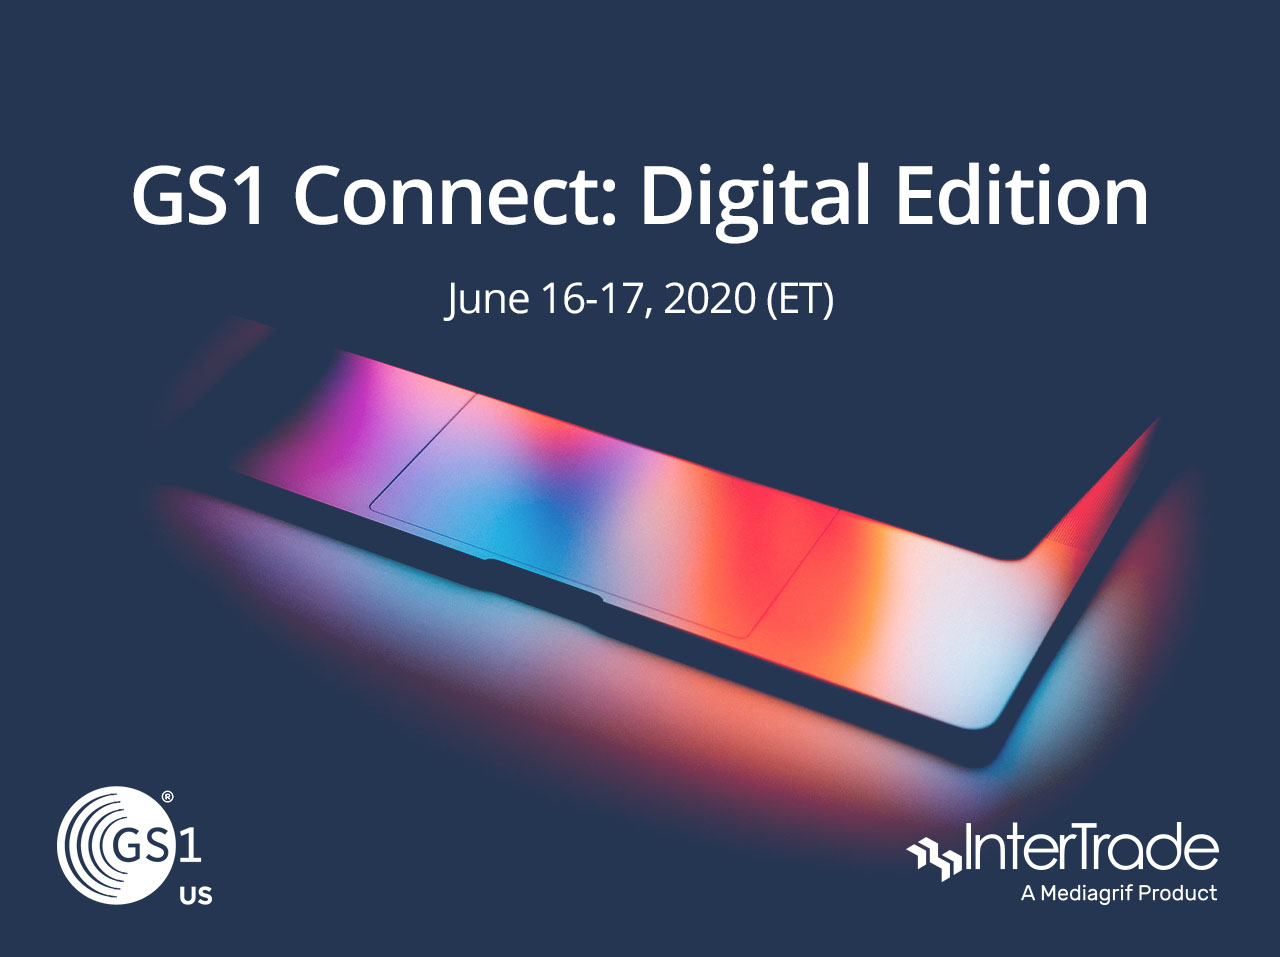 InterTrade and GS1 US Partner for GS1 Connect Digital Edition Intertrade